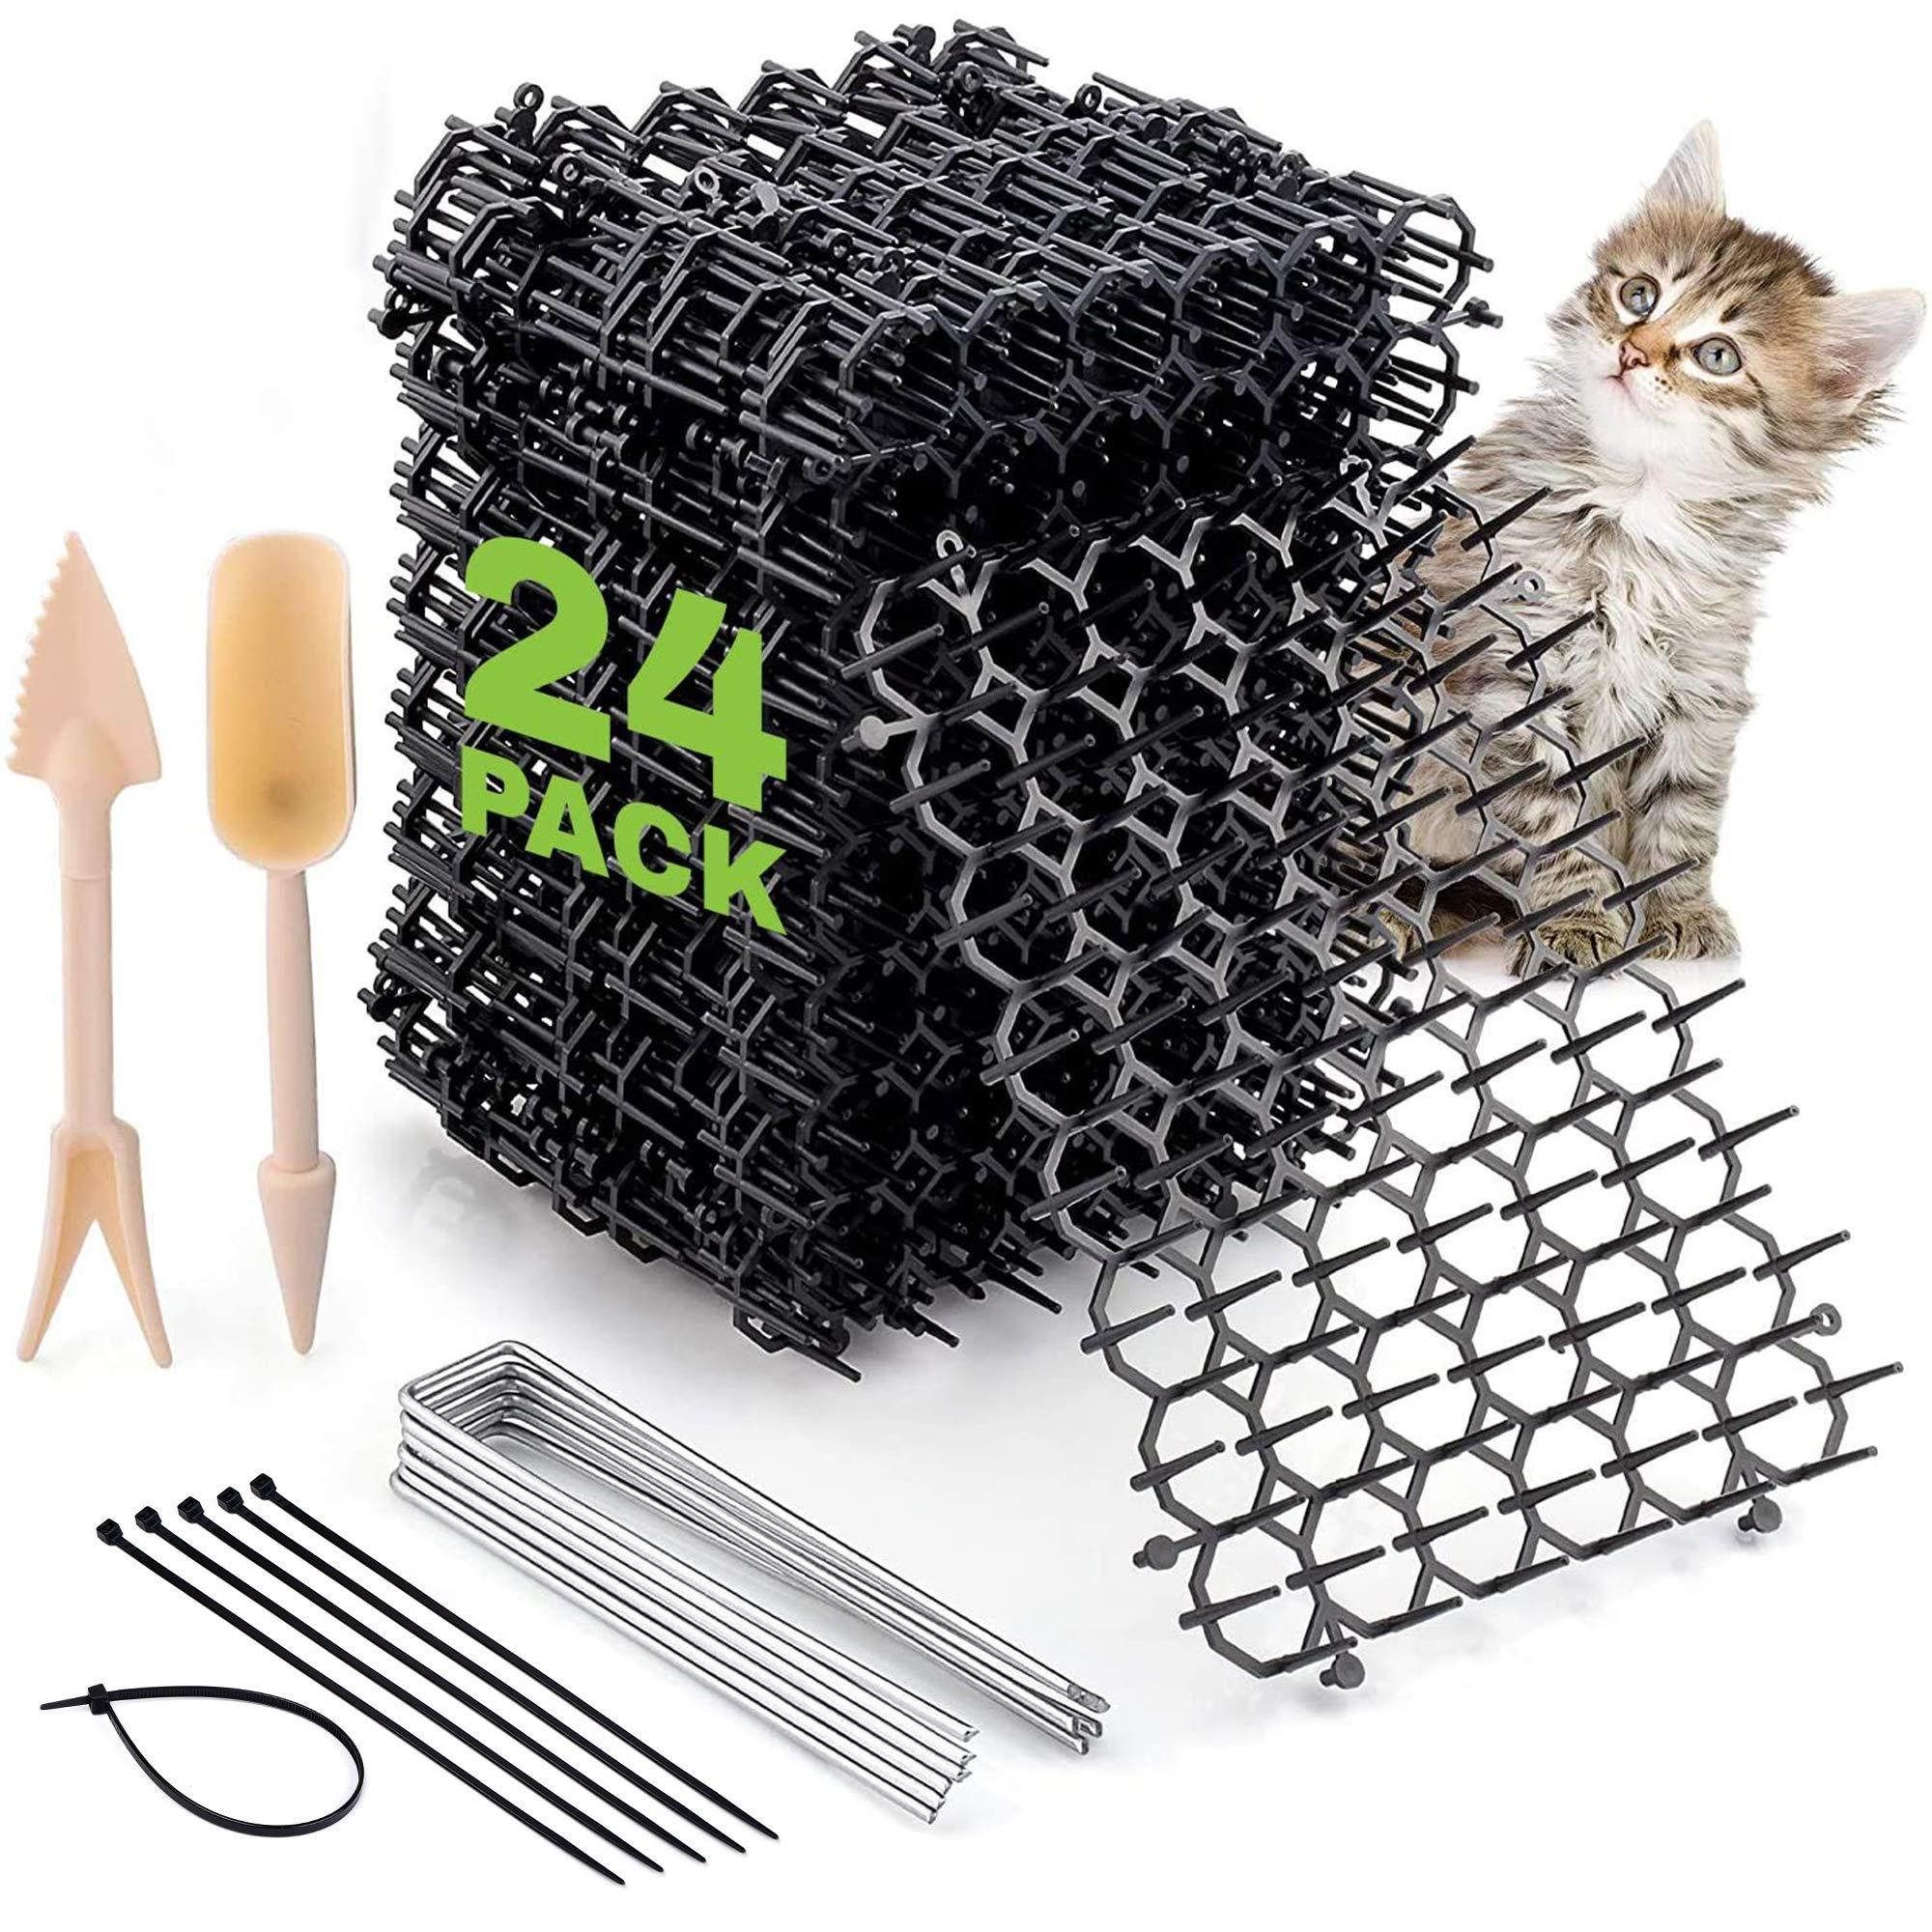 Cat Scat Spike Strips (24Pack) - Pet and Dog Deterrent Prickle Mat for Garden, Porch, Home - Effective, Non-Invasive and Safe - Easy to Install - Includes 6 Garden Pegs, 12 Ties and 2 Gardening Tools